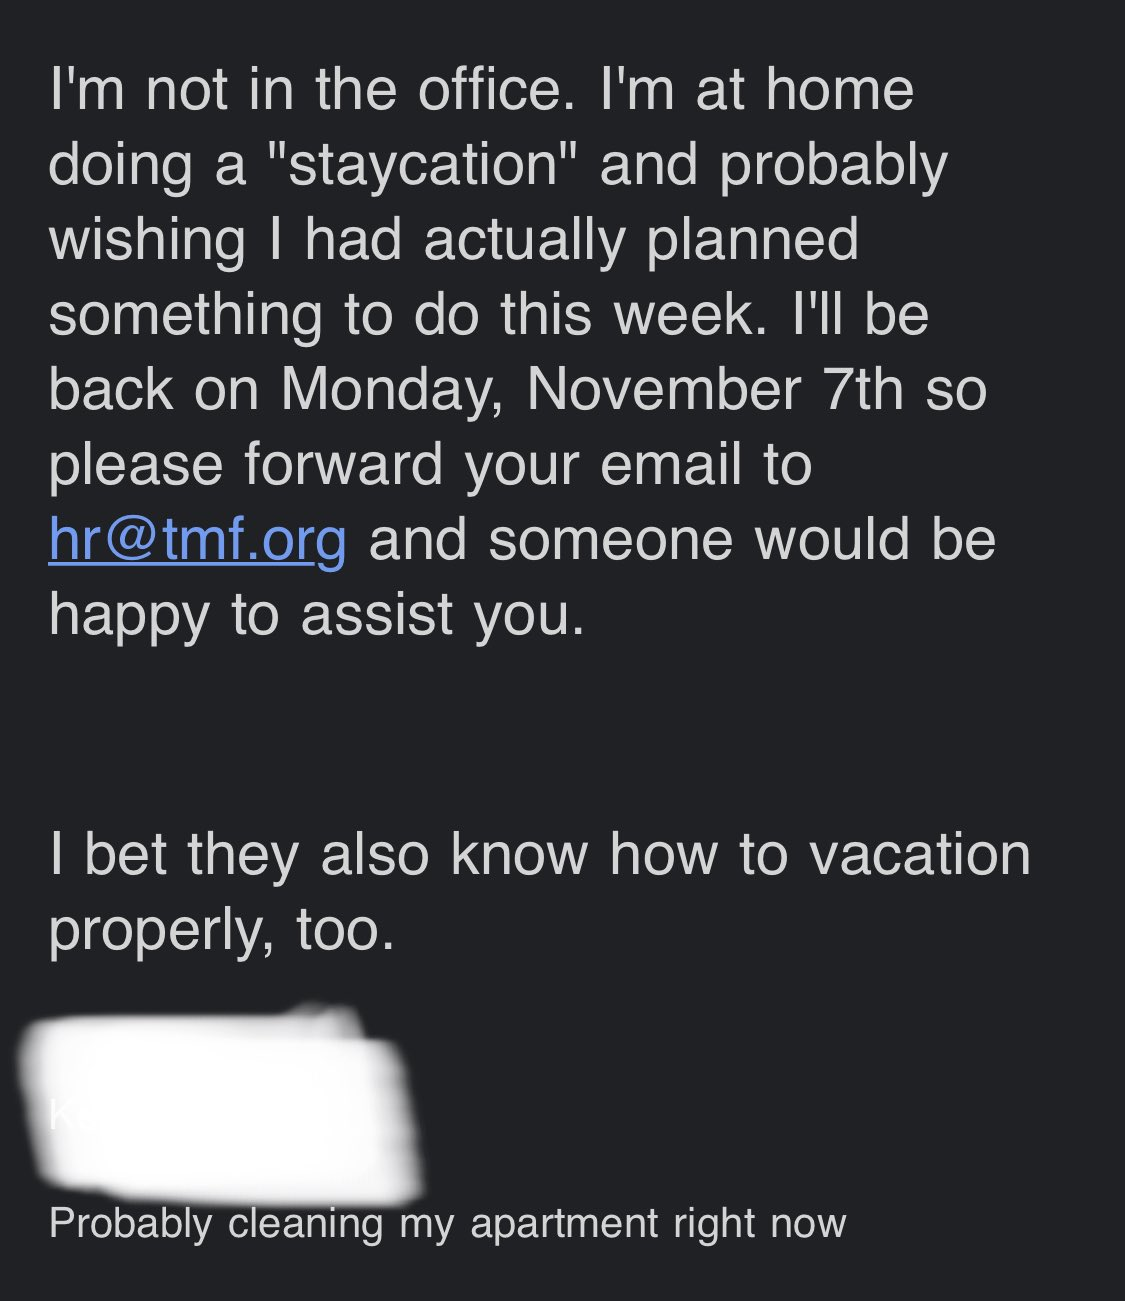 Vacation Mode On: How to Nail Funny Out-of-Office Messages (17 Examples)